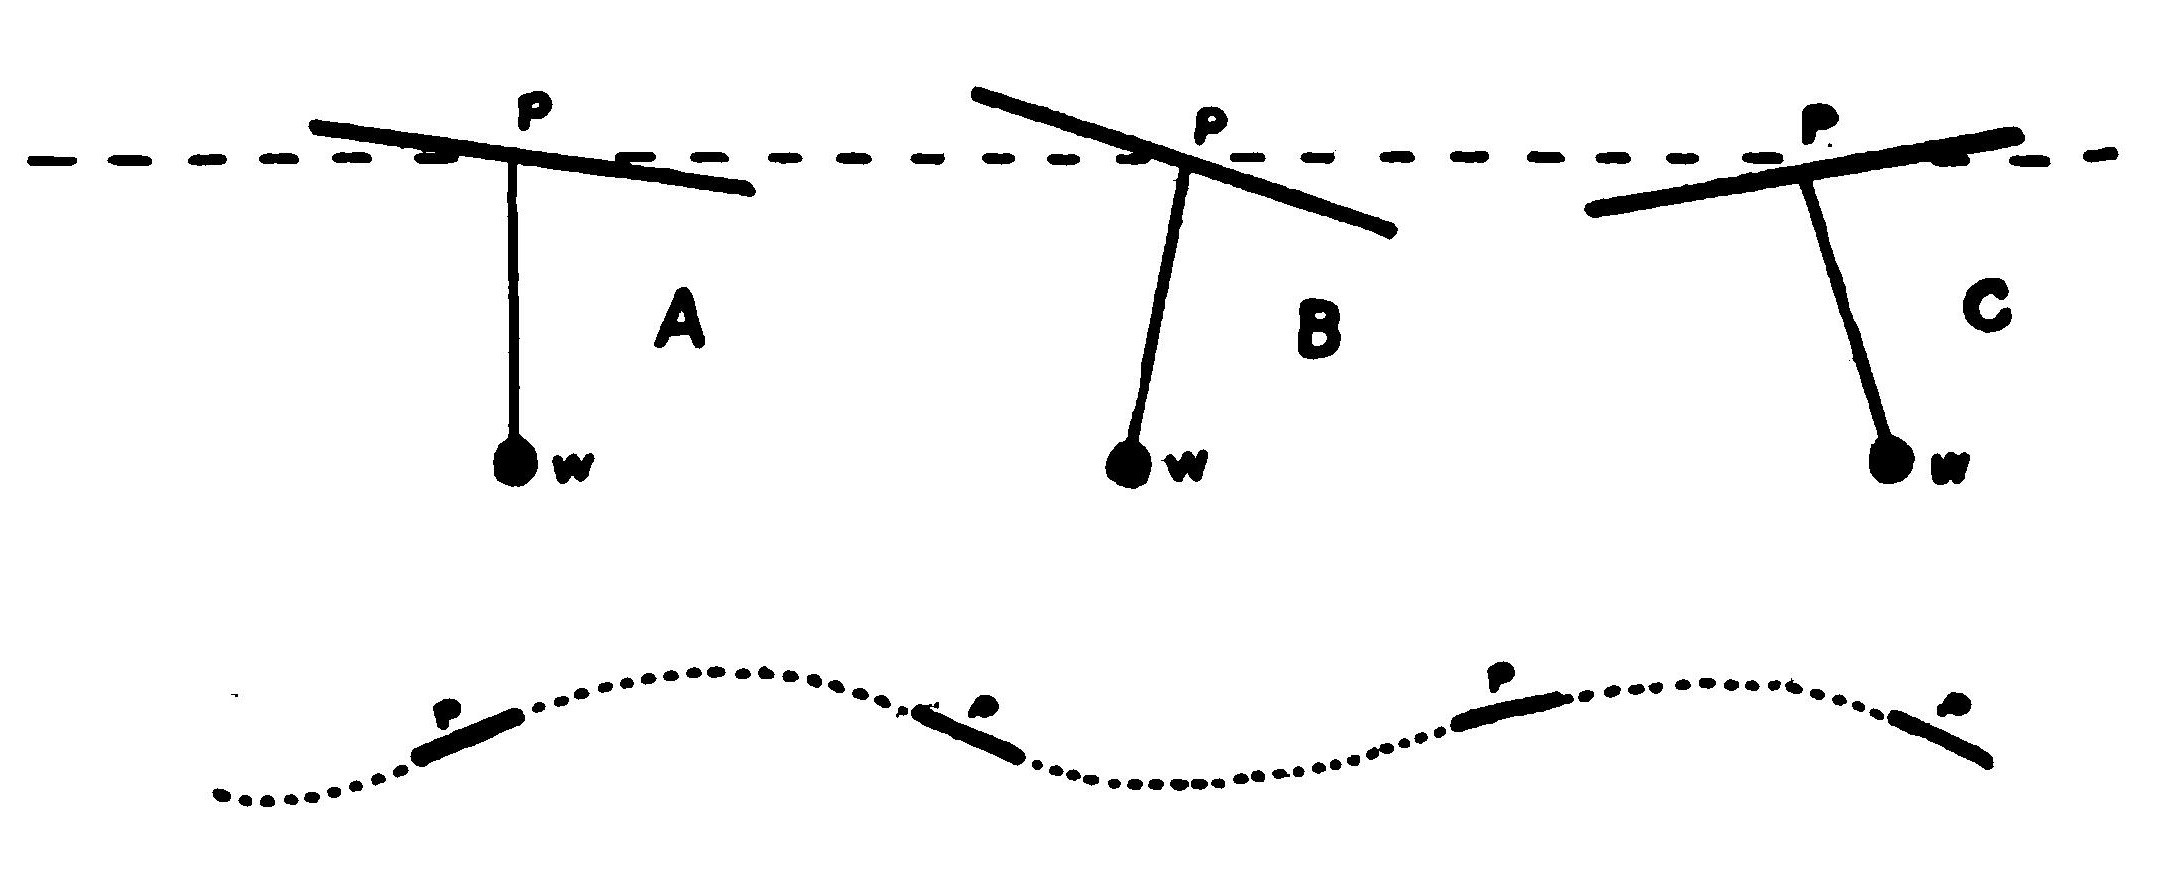 FIG. 45. Accentricity. The effect of placing the center of gravity too low.